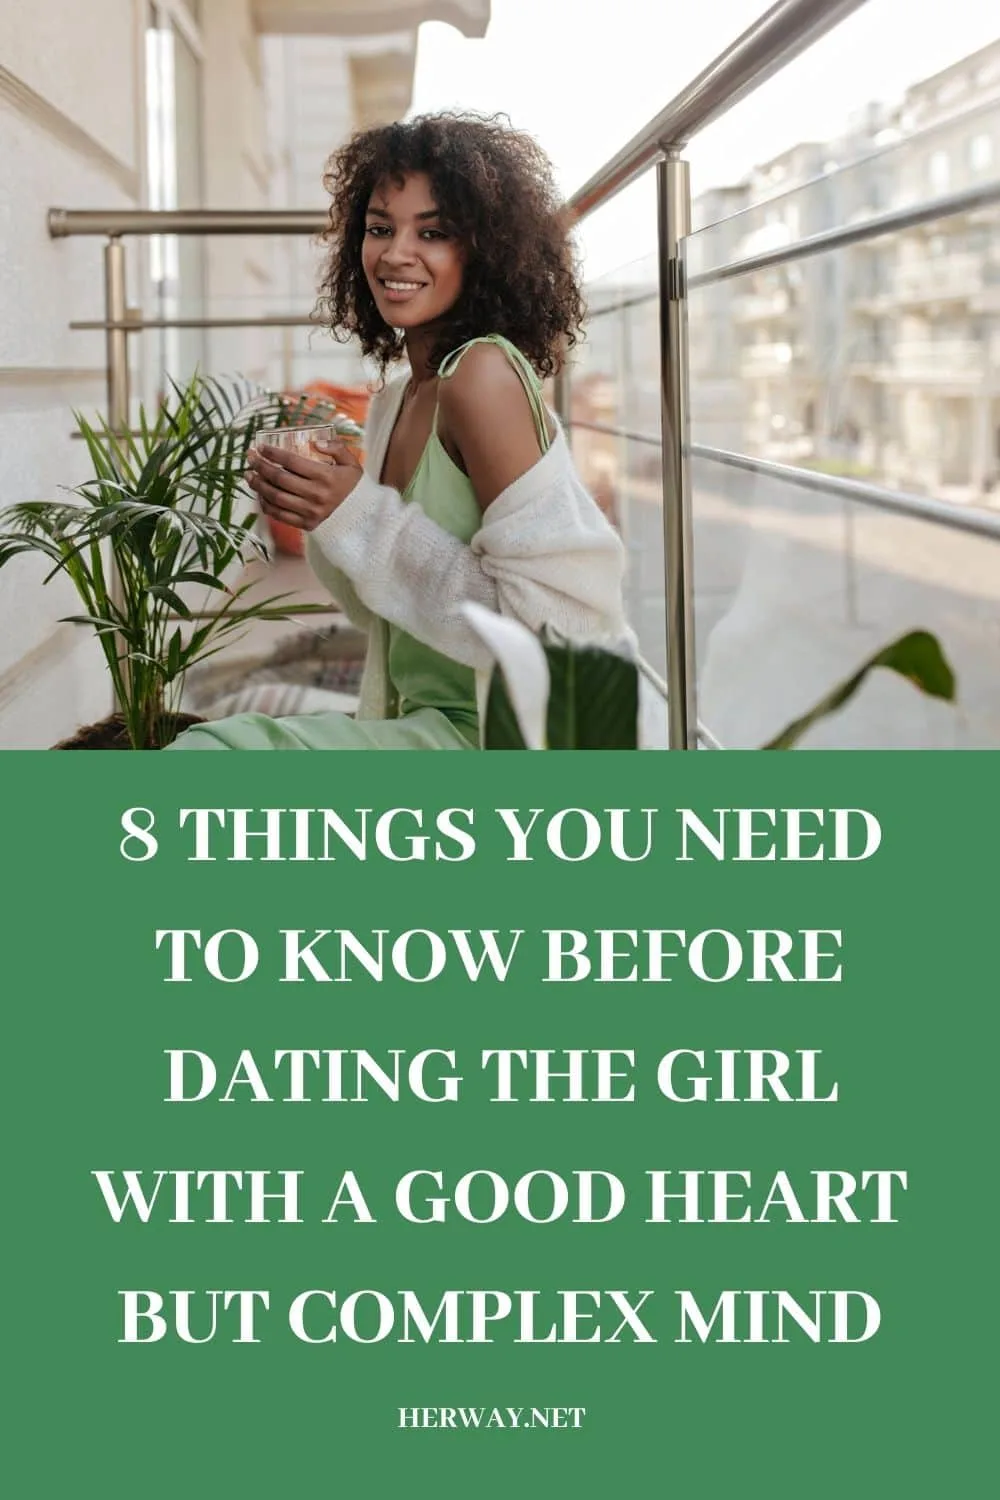 8 Things You Need To Know Before Dating the Girl With A Good Heart But Complex Mind